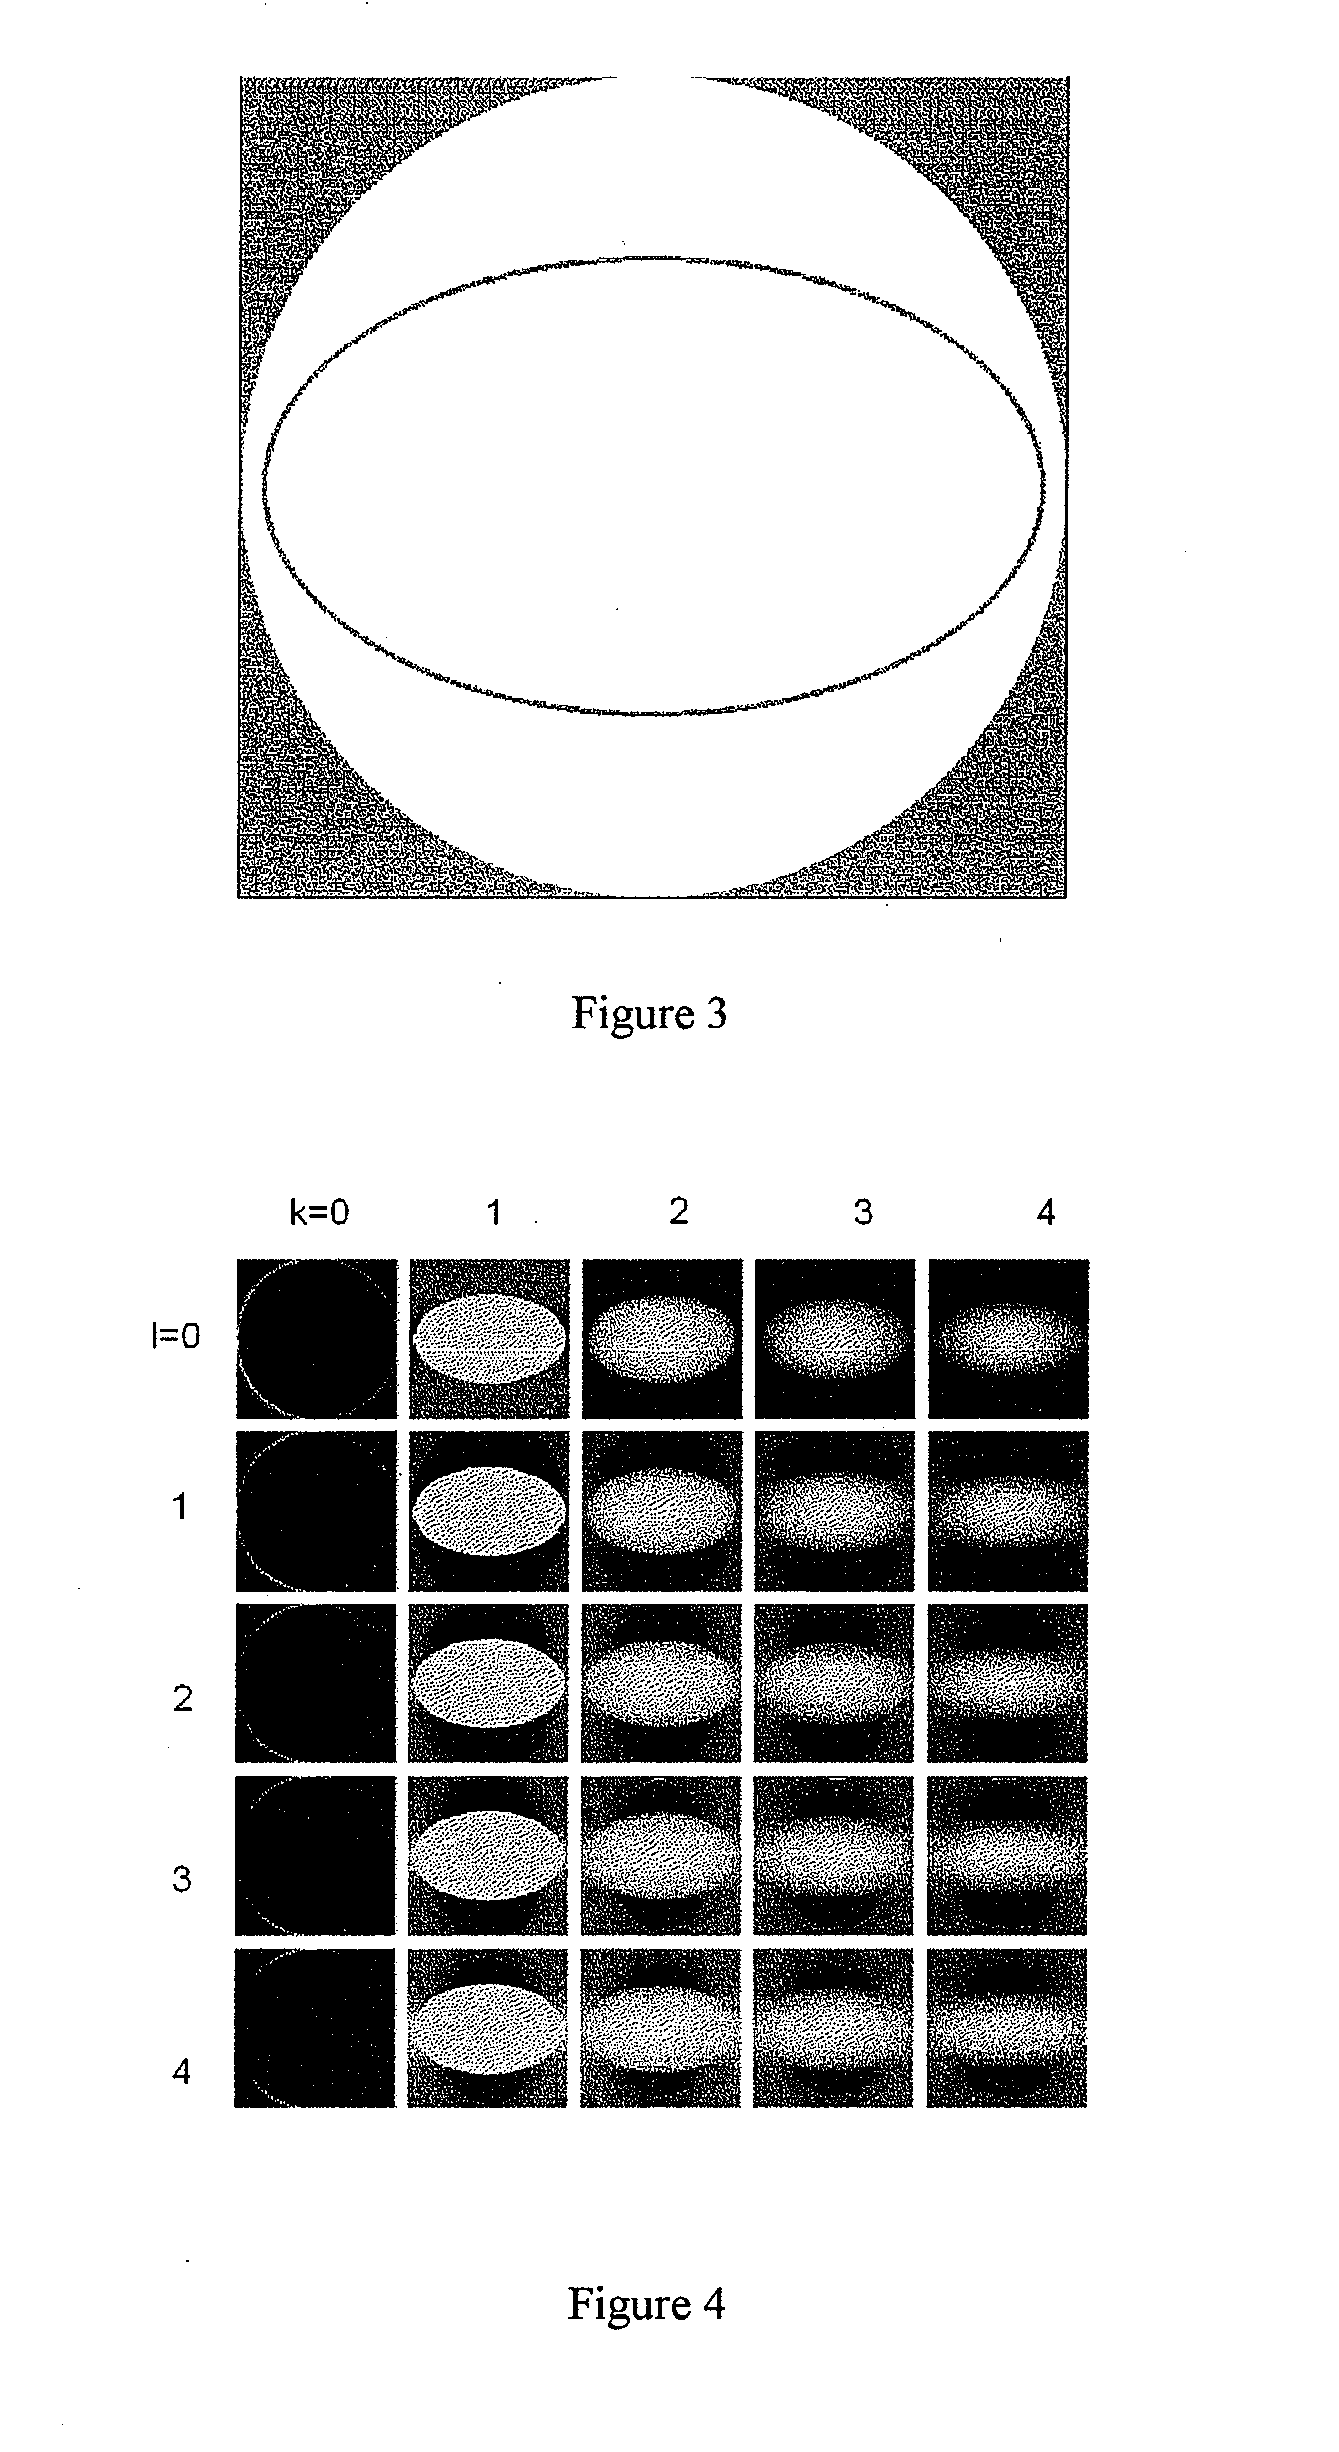 Method and apparatus for empirical determination of a correction function for correcting beam hardening and stray beam effects in projection radiography and computed tomography